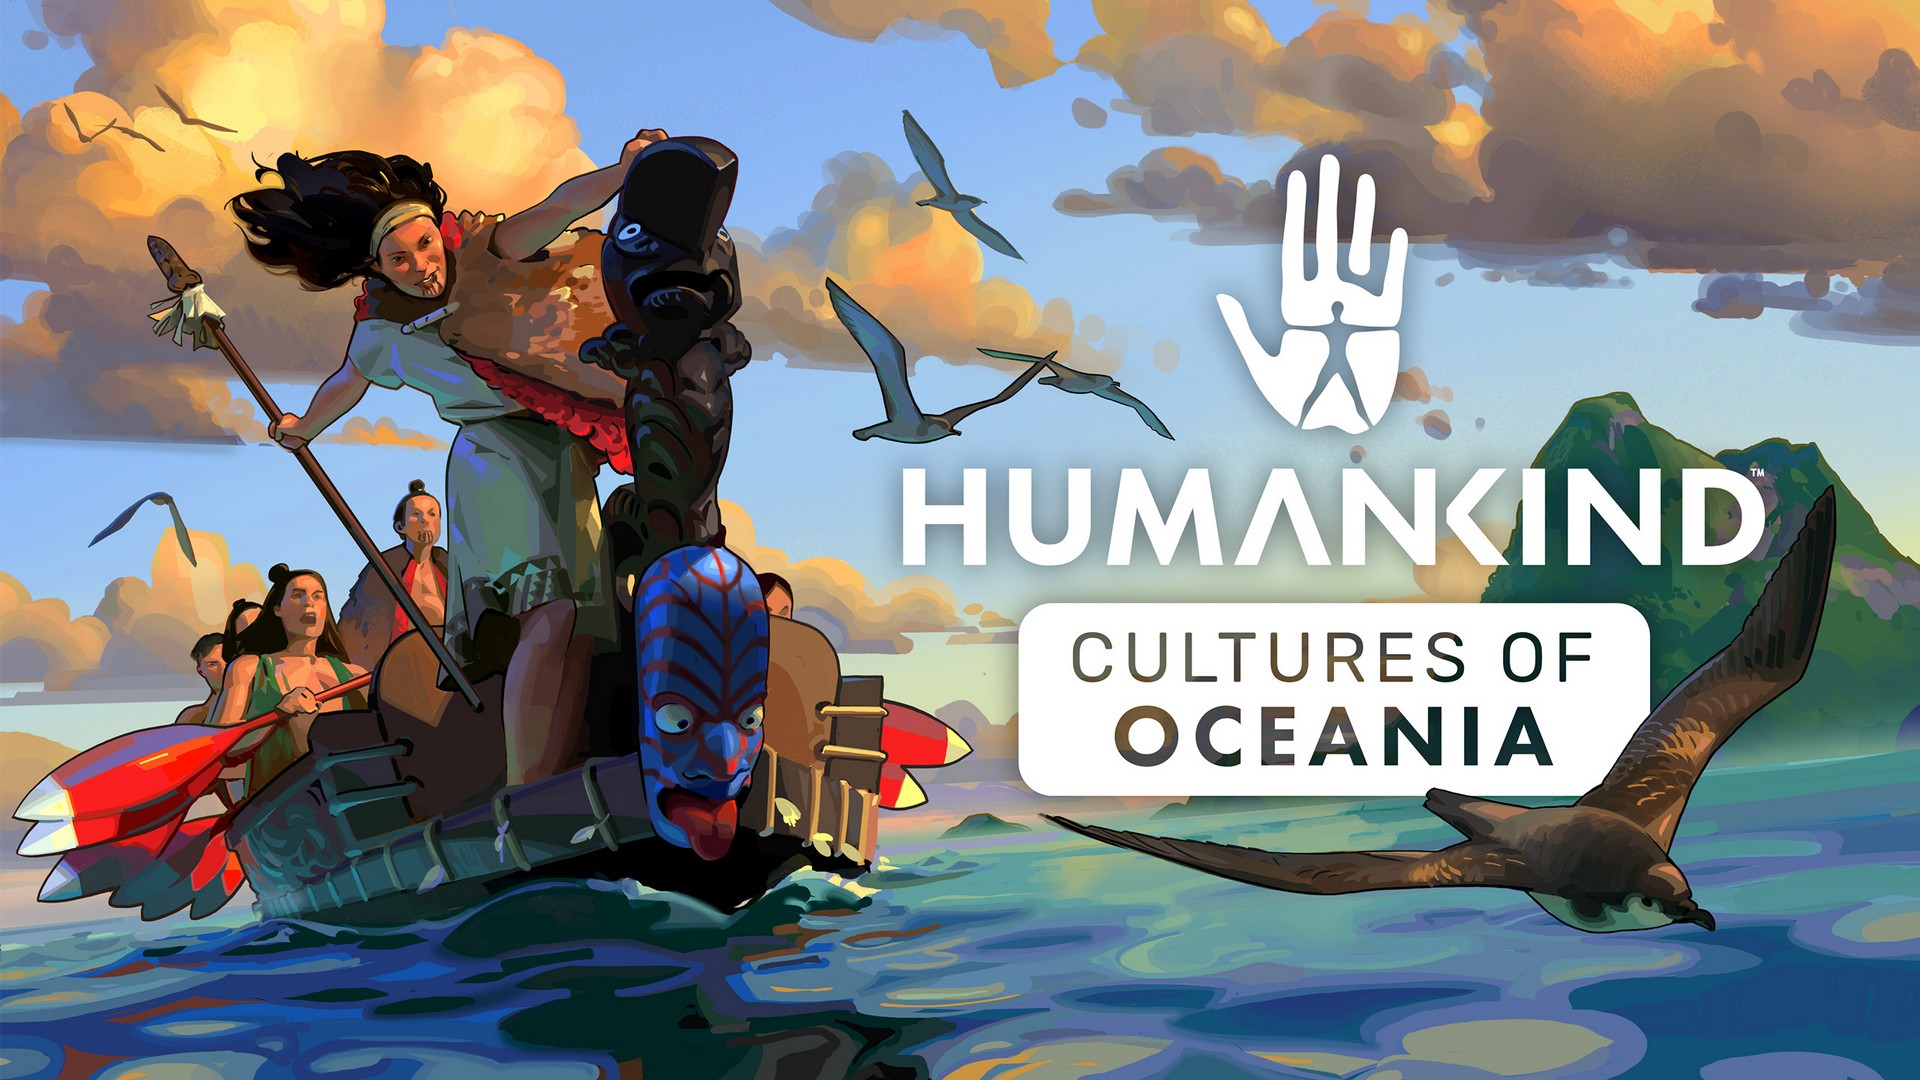 Humankind “Cultures Of Oceania” DLC Is Available Now For Pre-Order